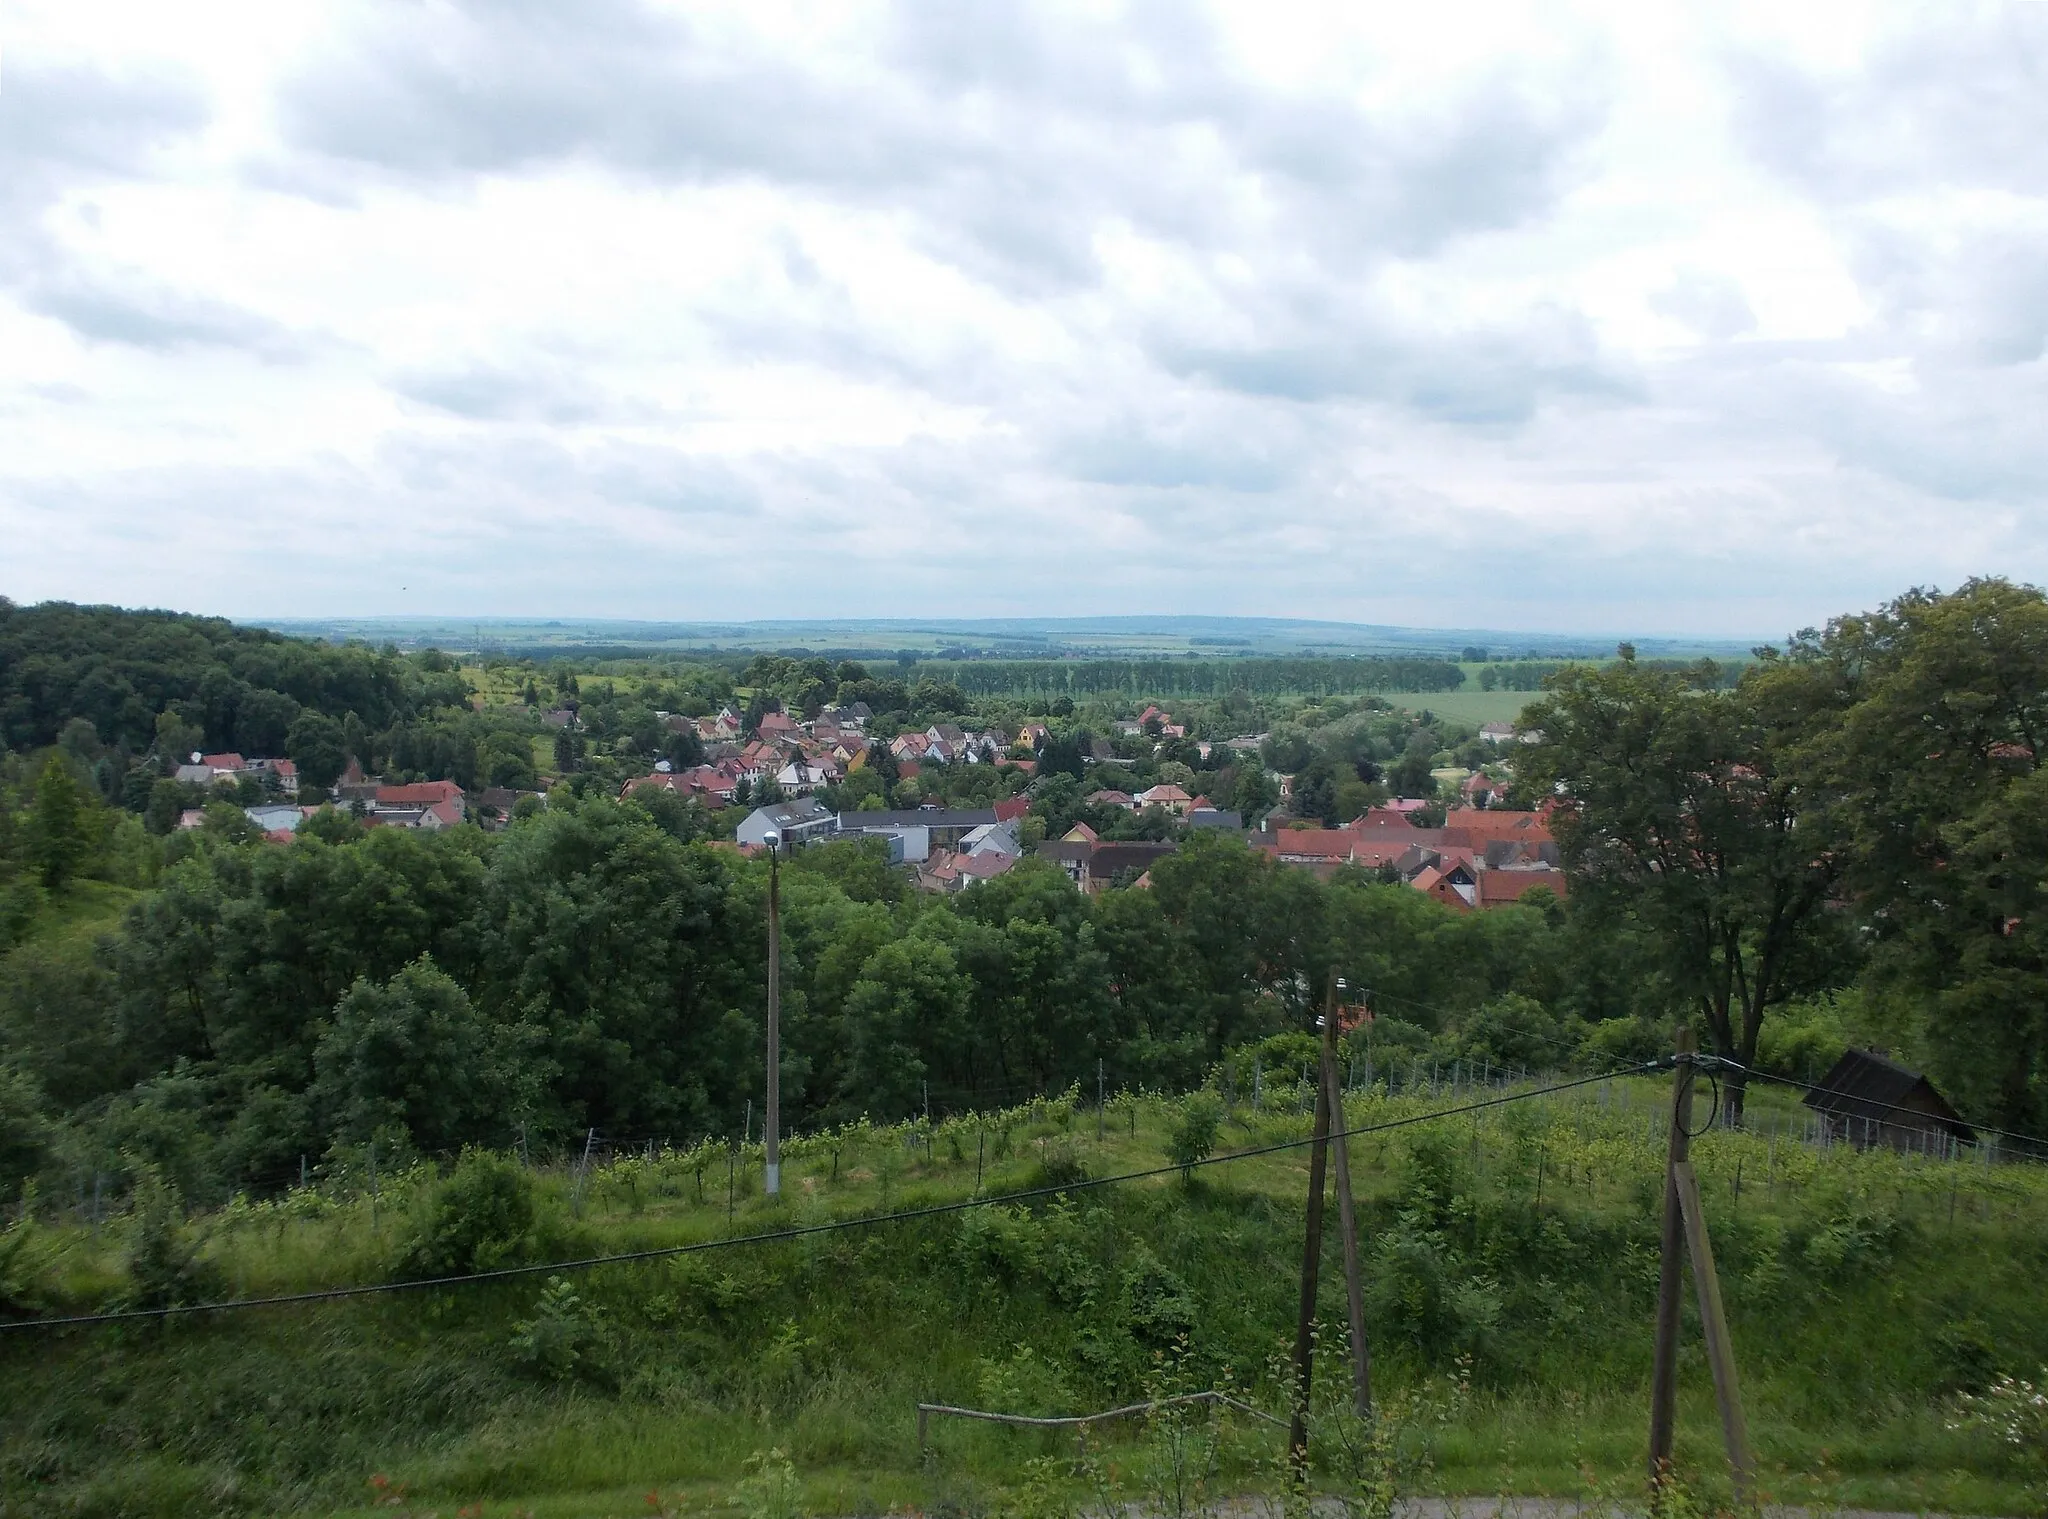 Photo showing: View of Rastenberg (Sömmerda district, Thuringia) from the "Fox Tower" vantage point